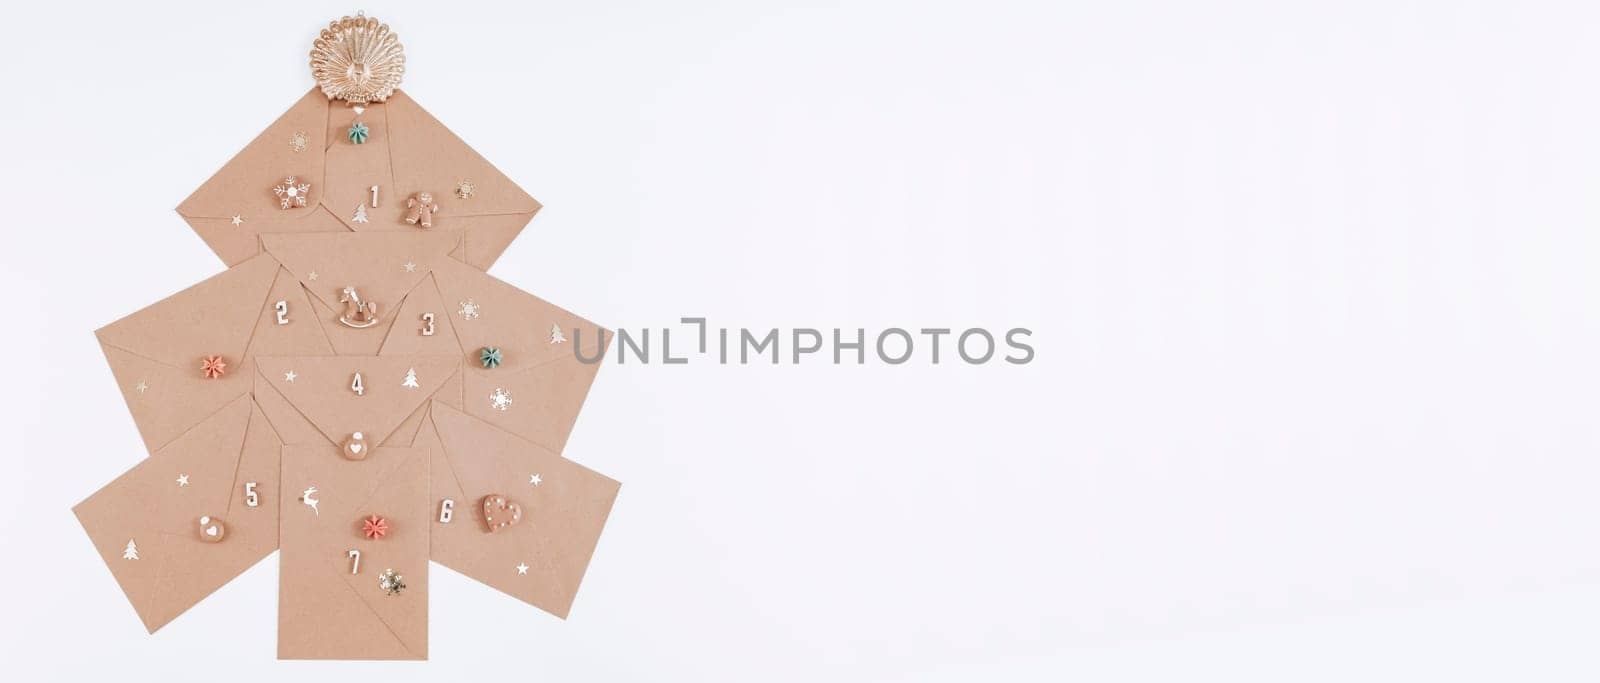 Creative Christmas advent calendar made from craft envelopes, wooden numbers, cookies and Christmas decor on the left against white background with space for text on the right, top view close-up.